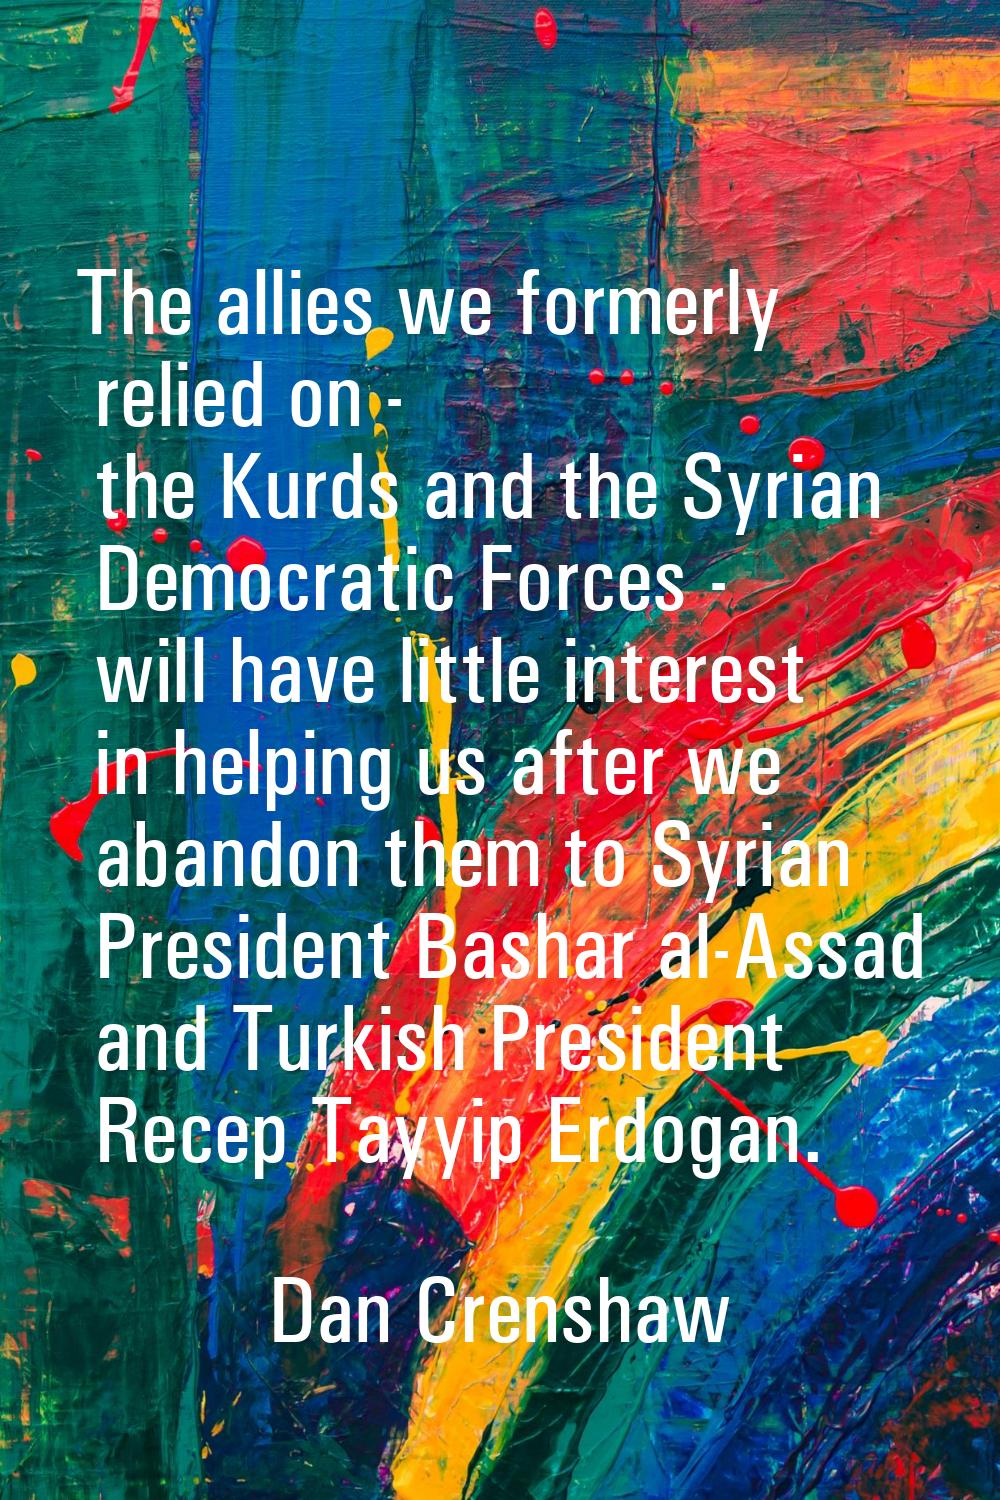 The allies we formerly relied on - the Kurds and the Syrian Democratic Forces - will have little in